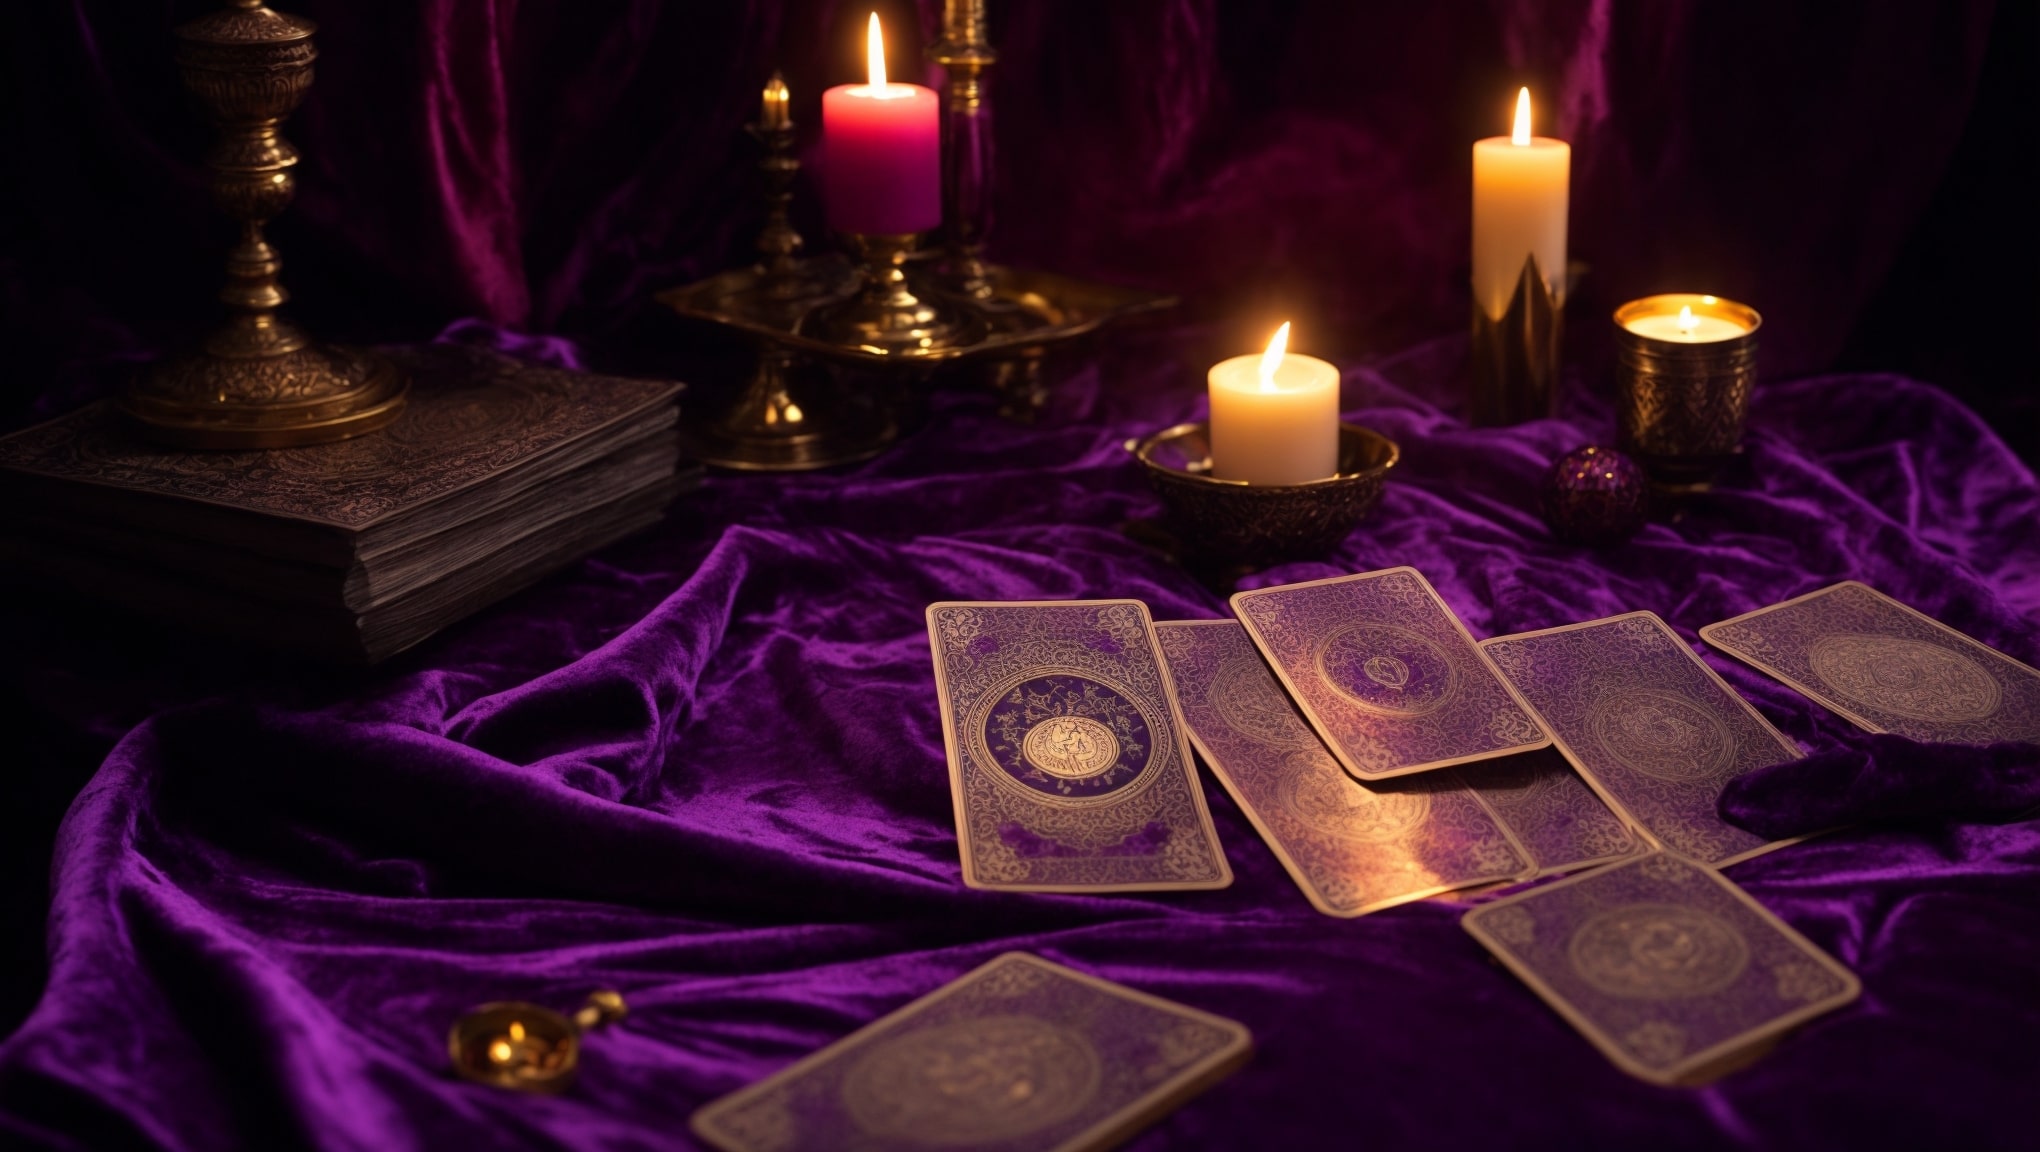 How To Interpret Tarot Spreads: What Does Your Tarot Spread Really Mean?